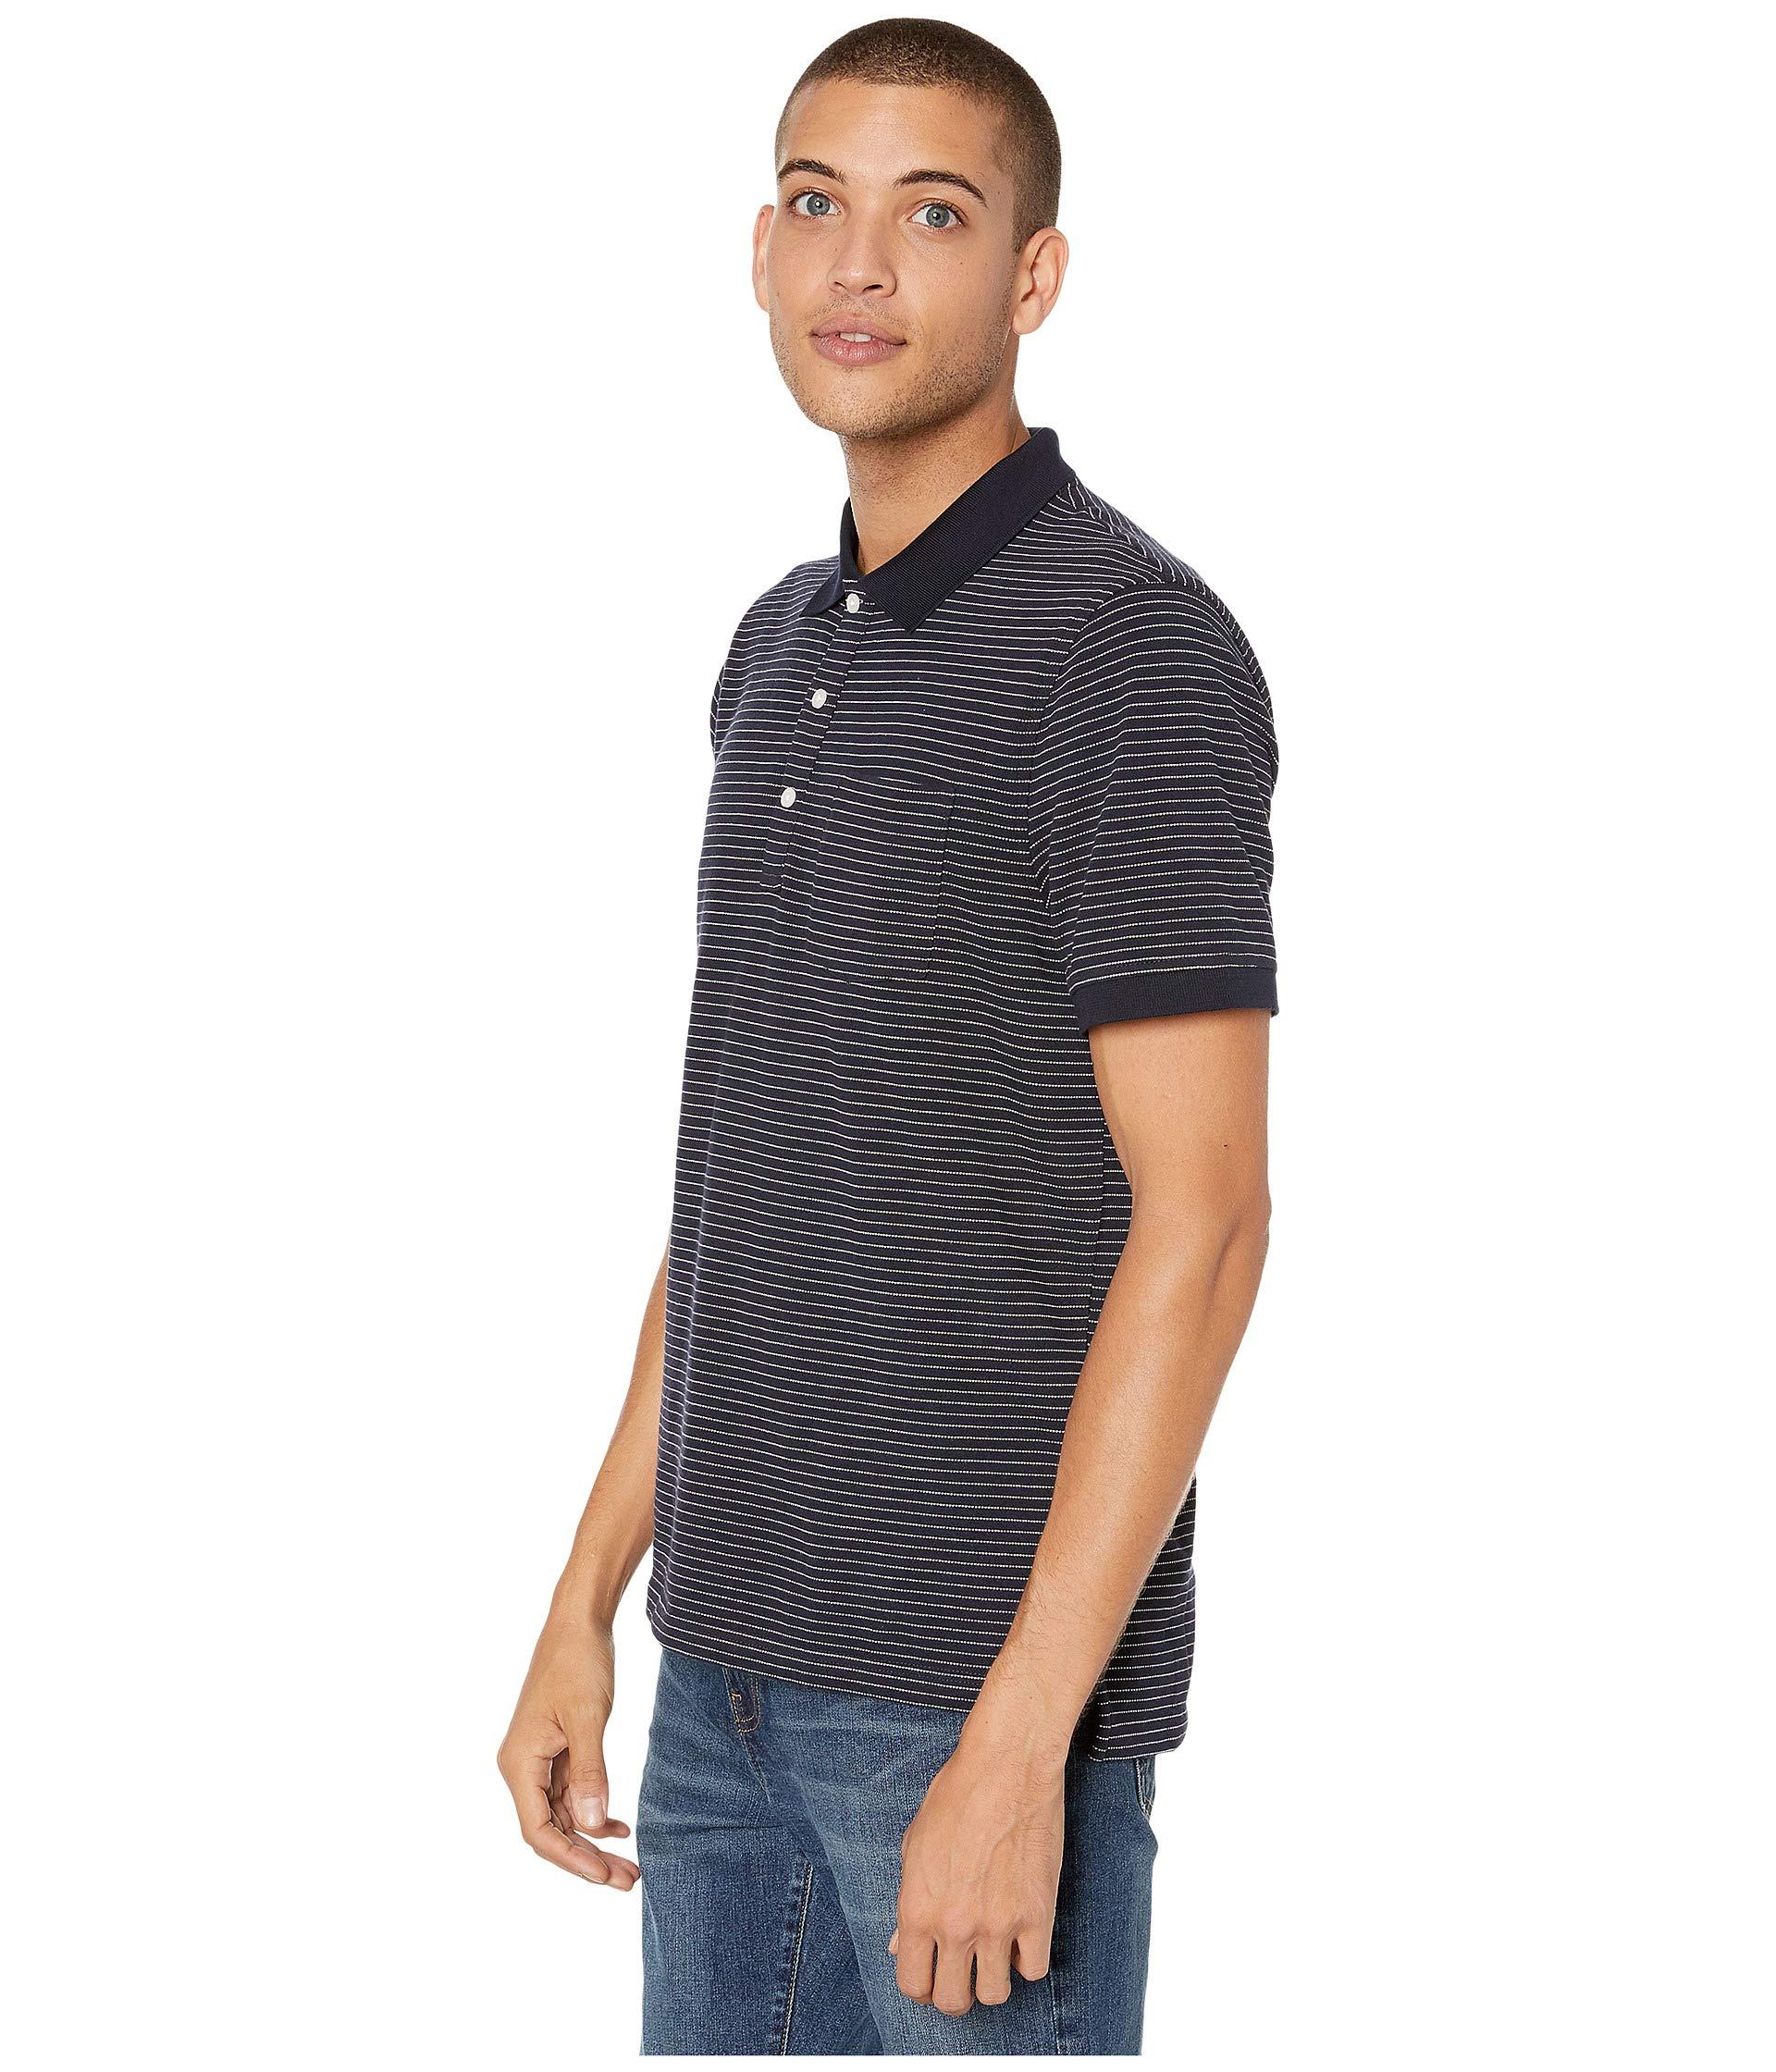 J.Crew Cotton Stretch Pique Polo In Navy Stripe in Blue for Men - Lyst